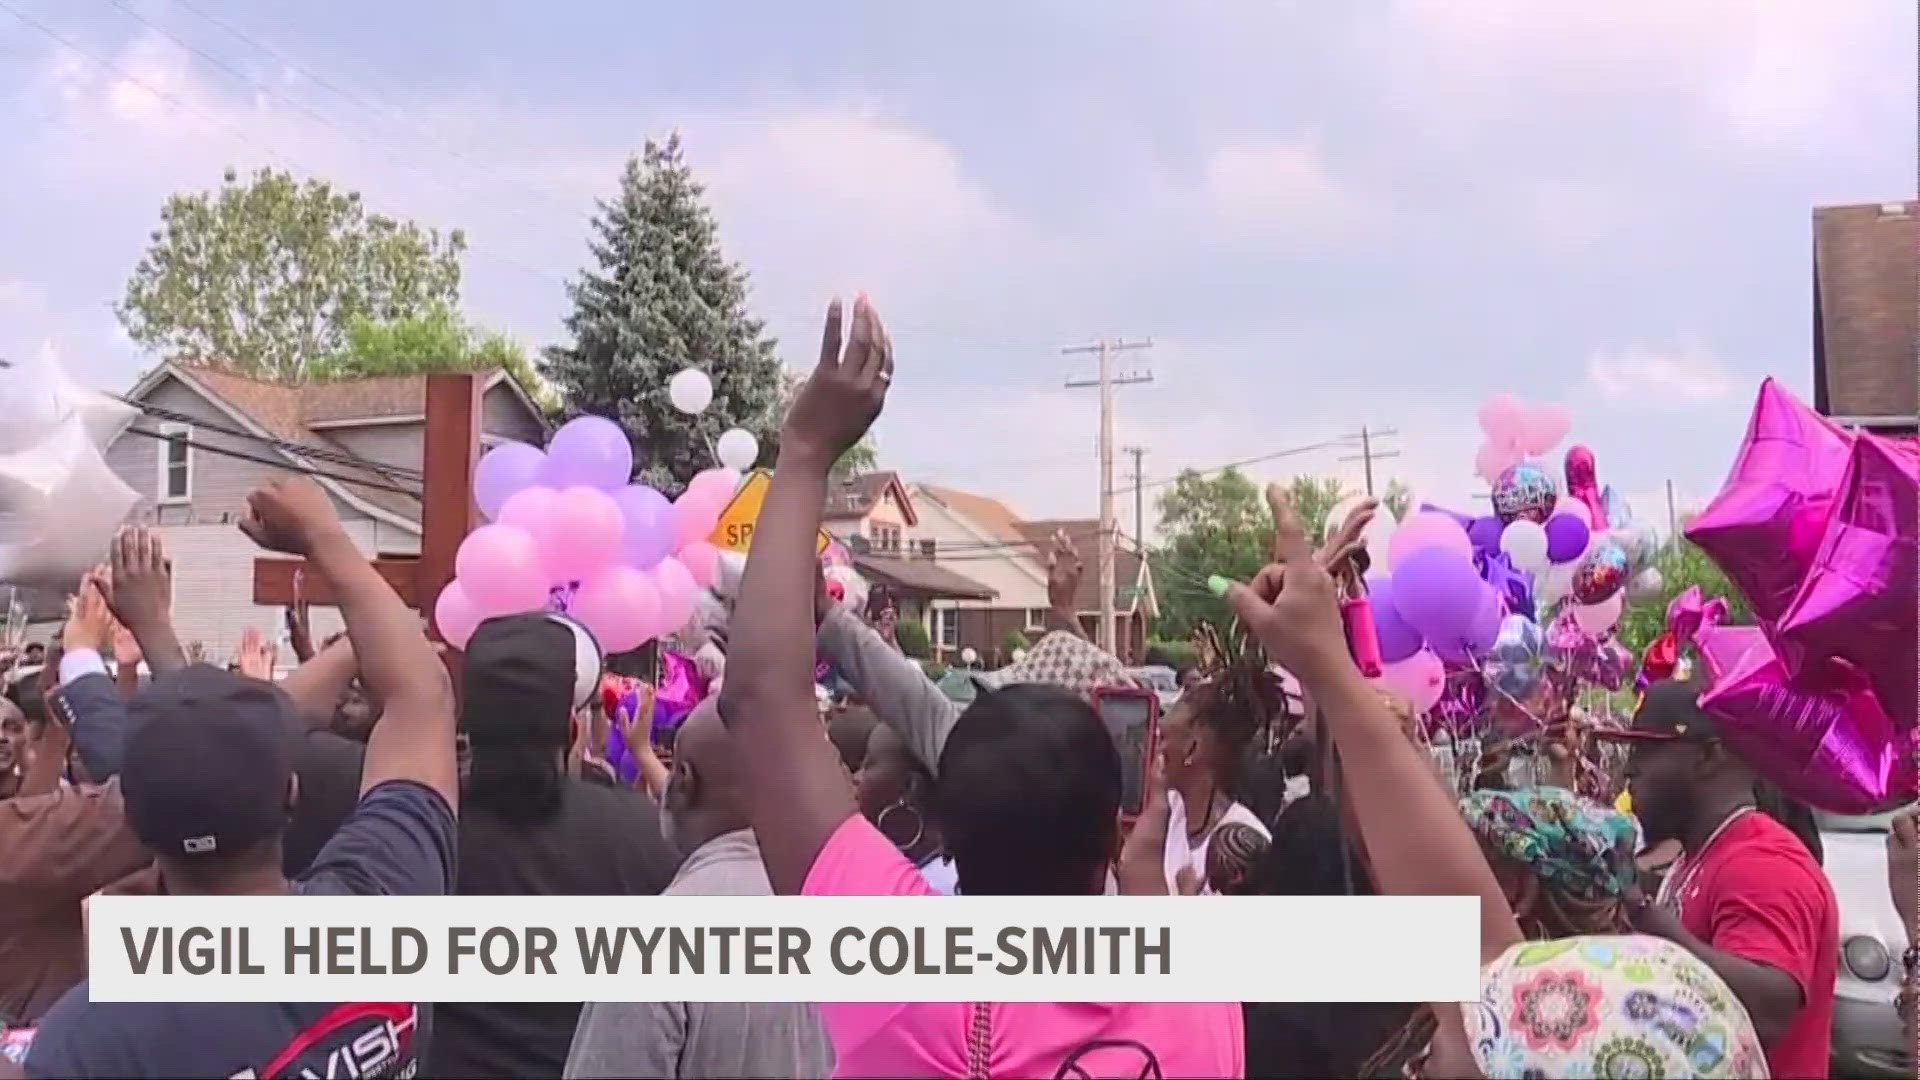 Hundreds gathered Thursday night in Detroit to pay their respects to Wynter Cole-Smith, the 2-year-old girl found dead Wednesday night.